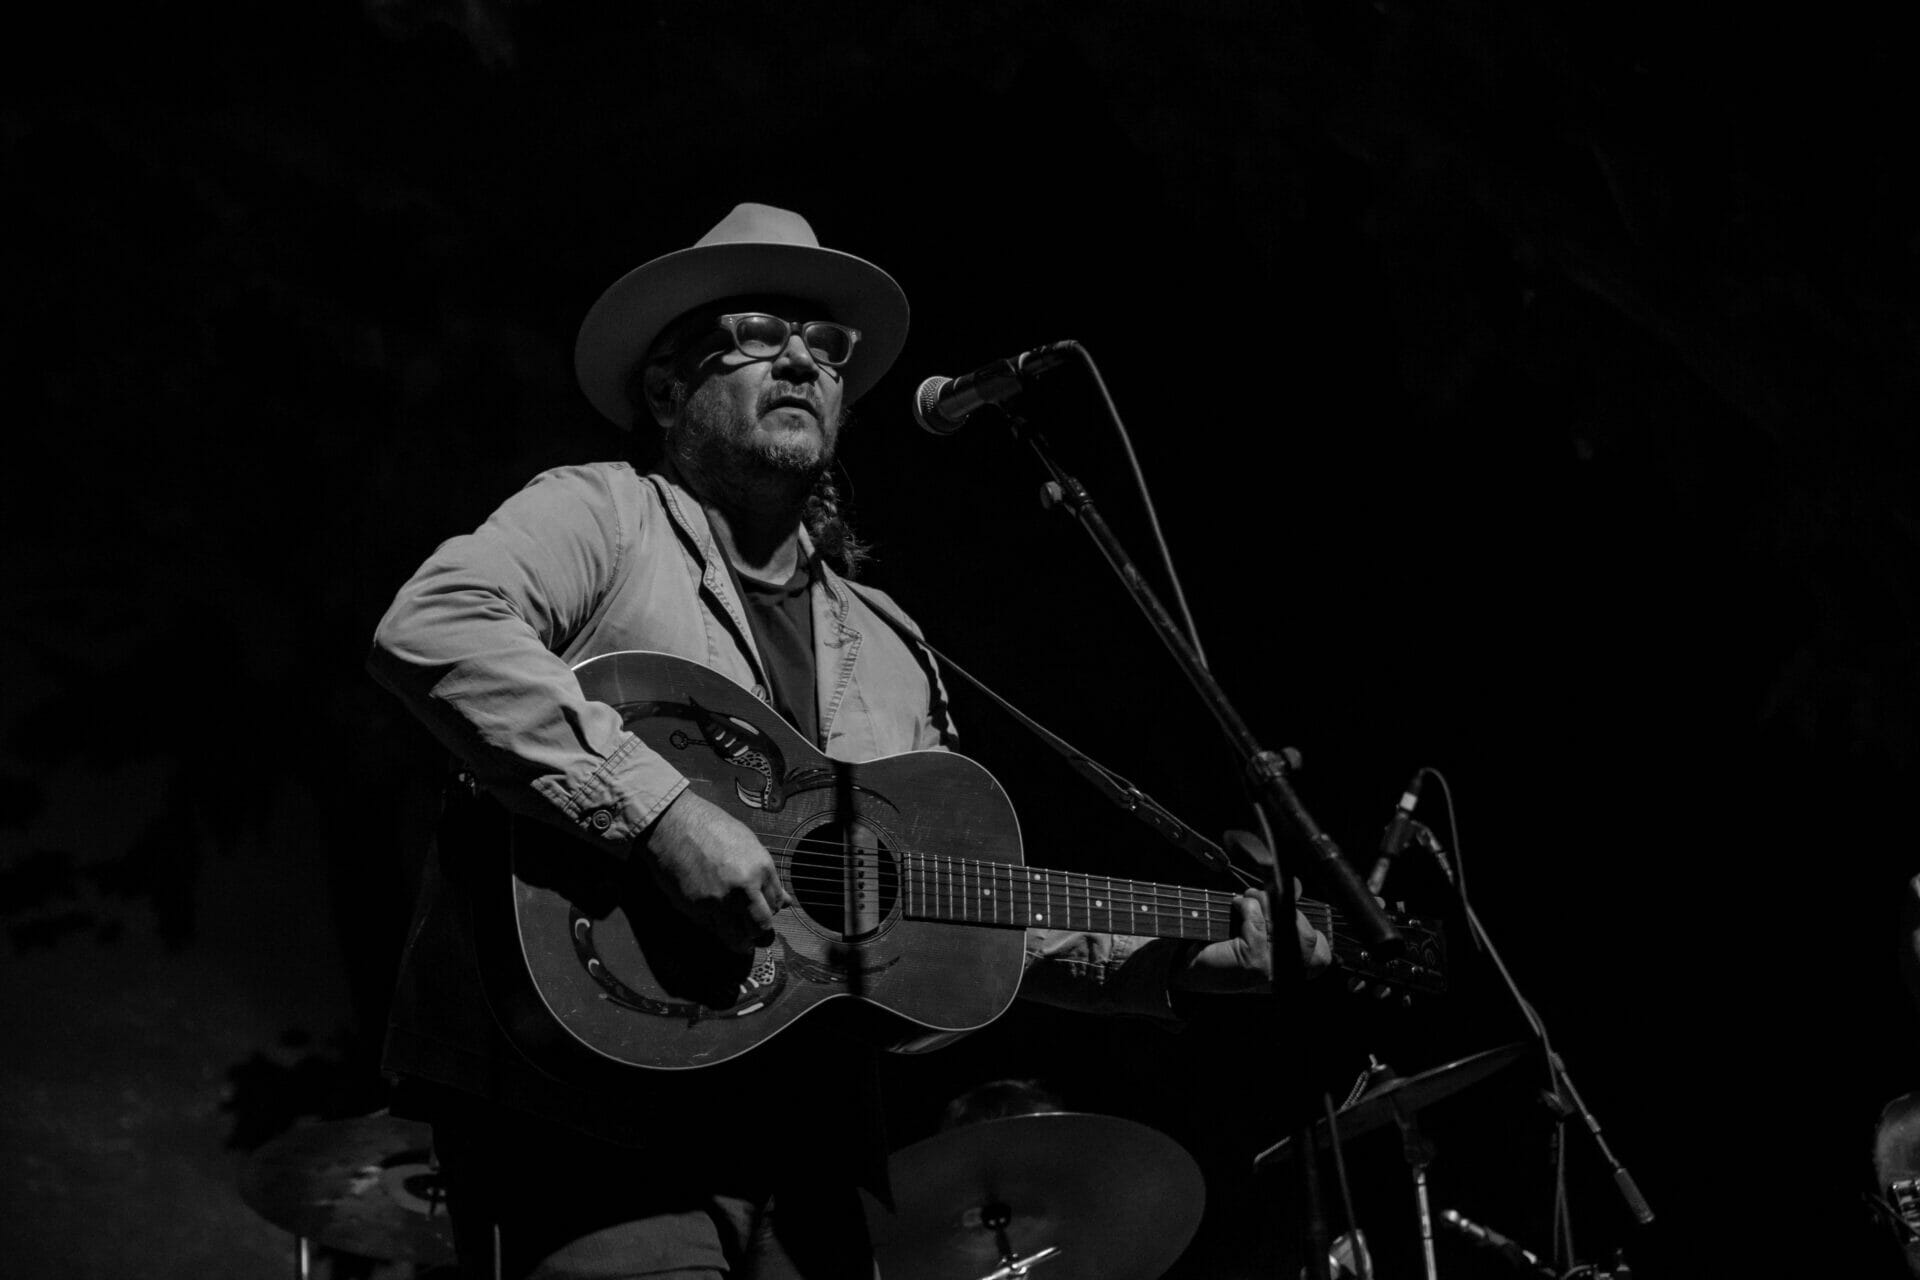 Watch Now: Wilco Join Yo La Tengo in Chicago, Cover The Beatles, Bob Dylan and More